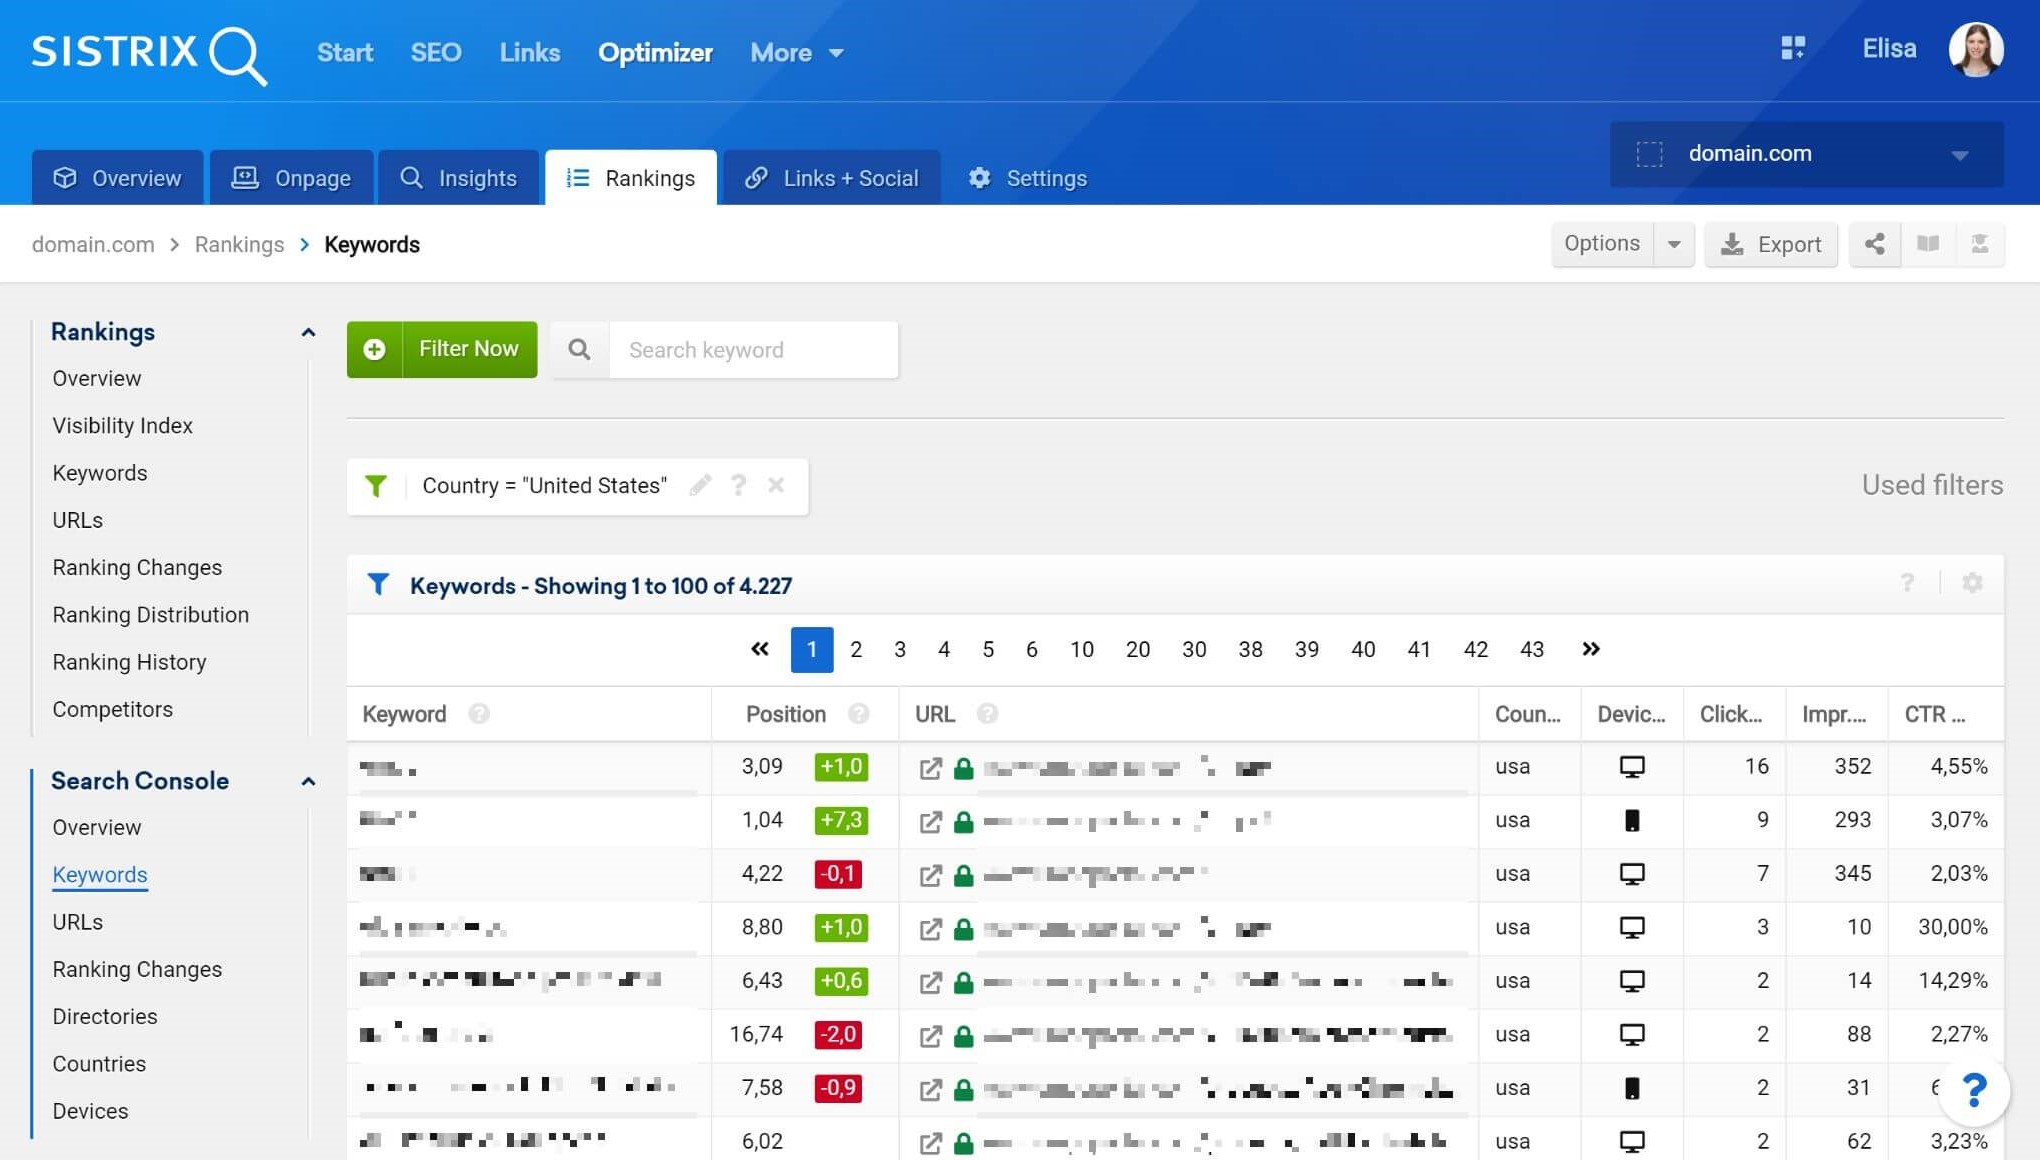 The Search Console keyword section of the SISTRIX Optimizer